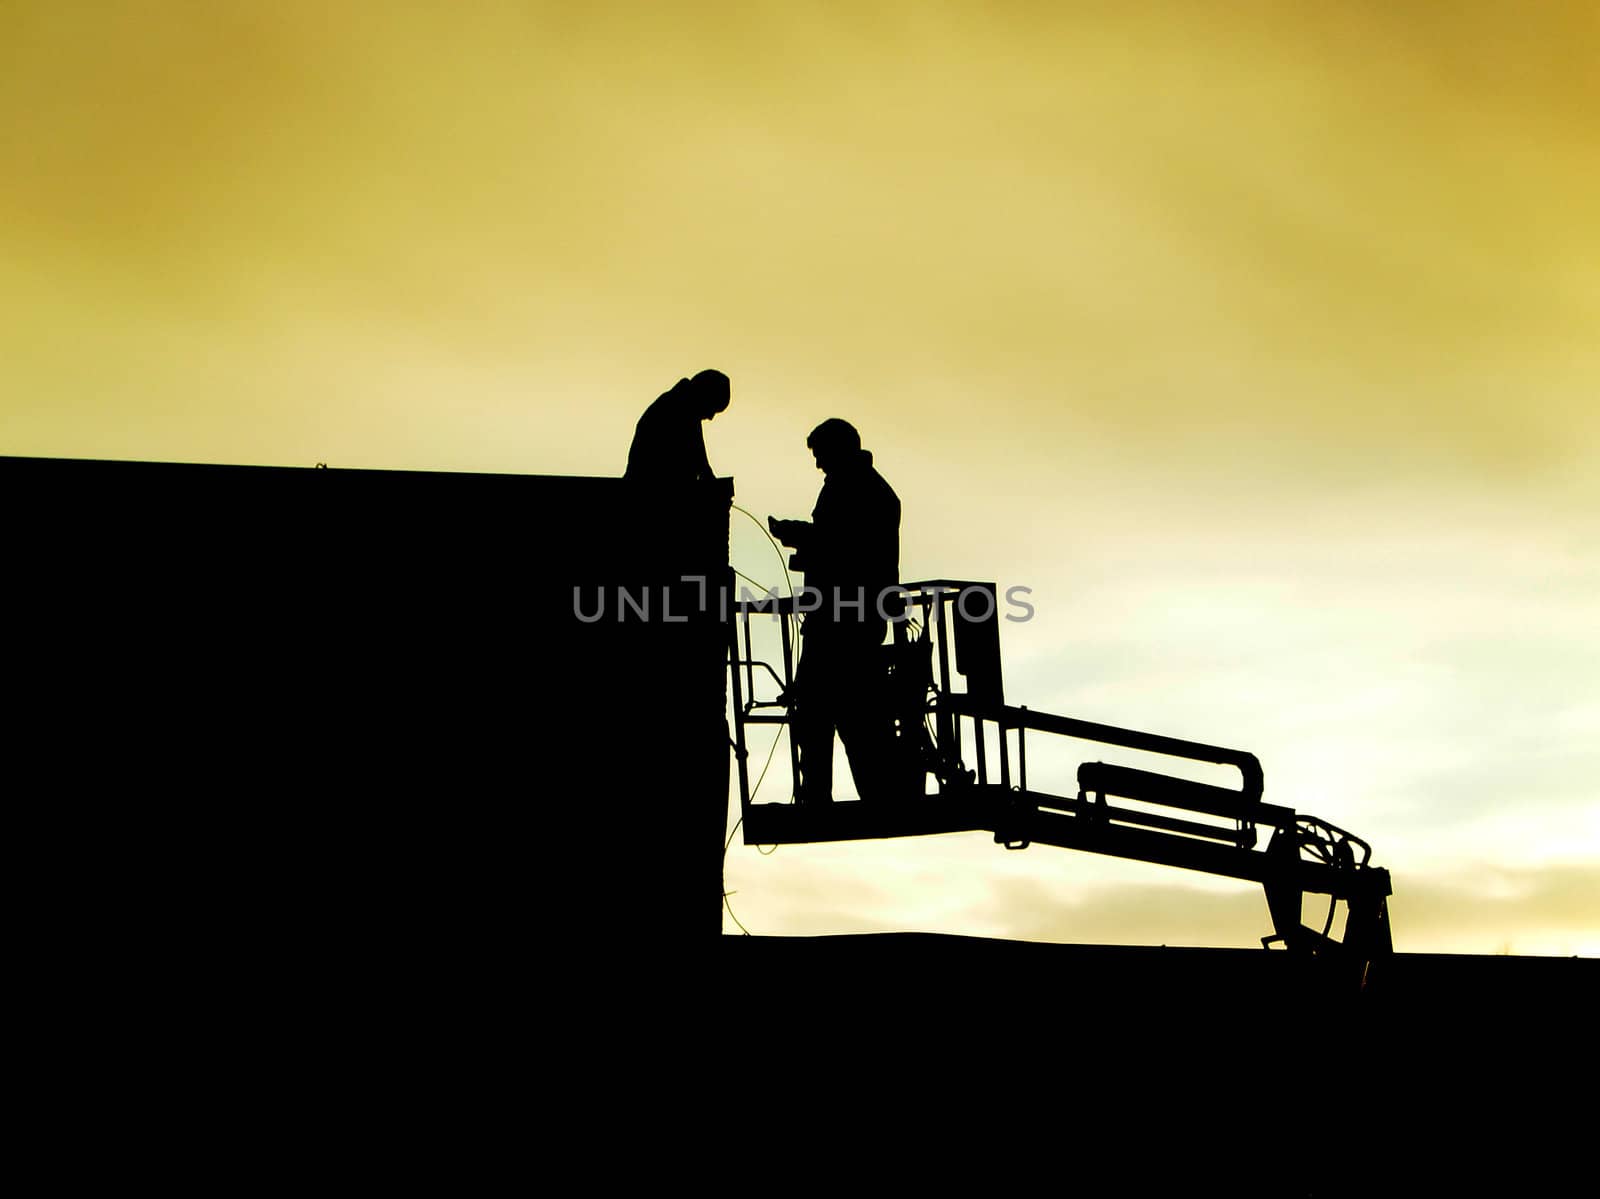 Silhouettes of men working at night by kekanger